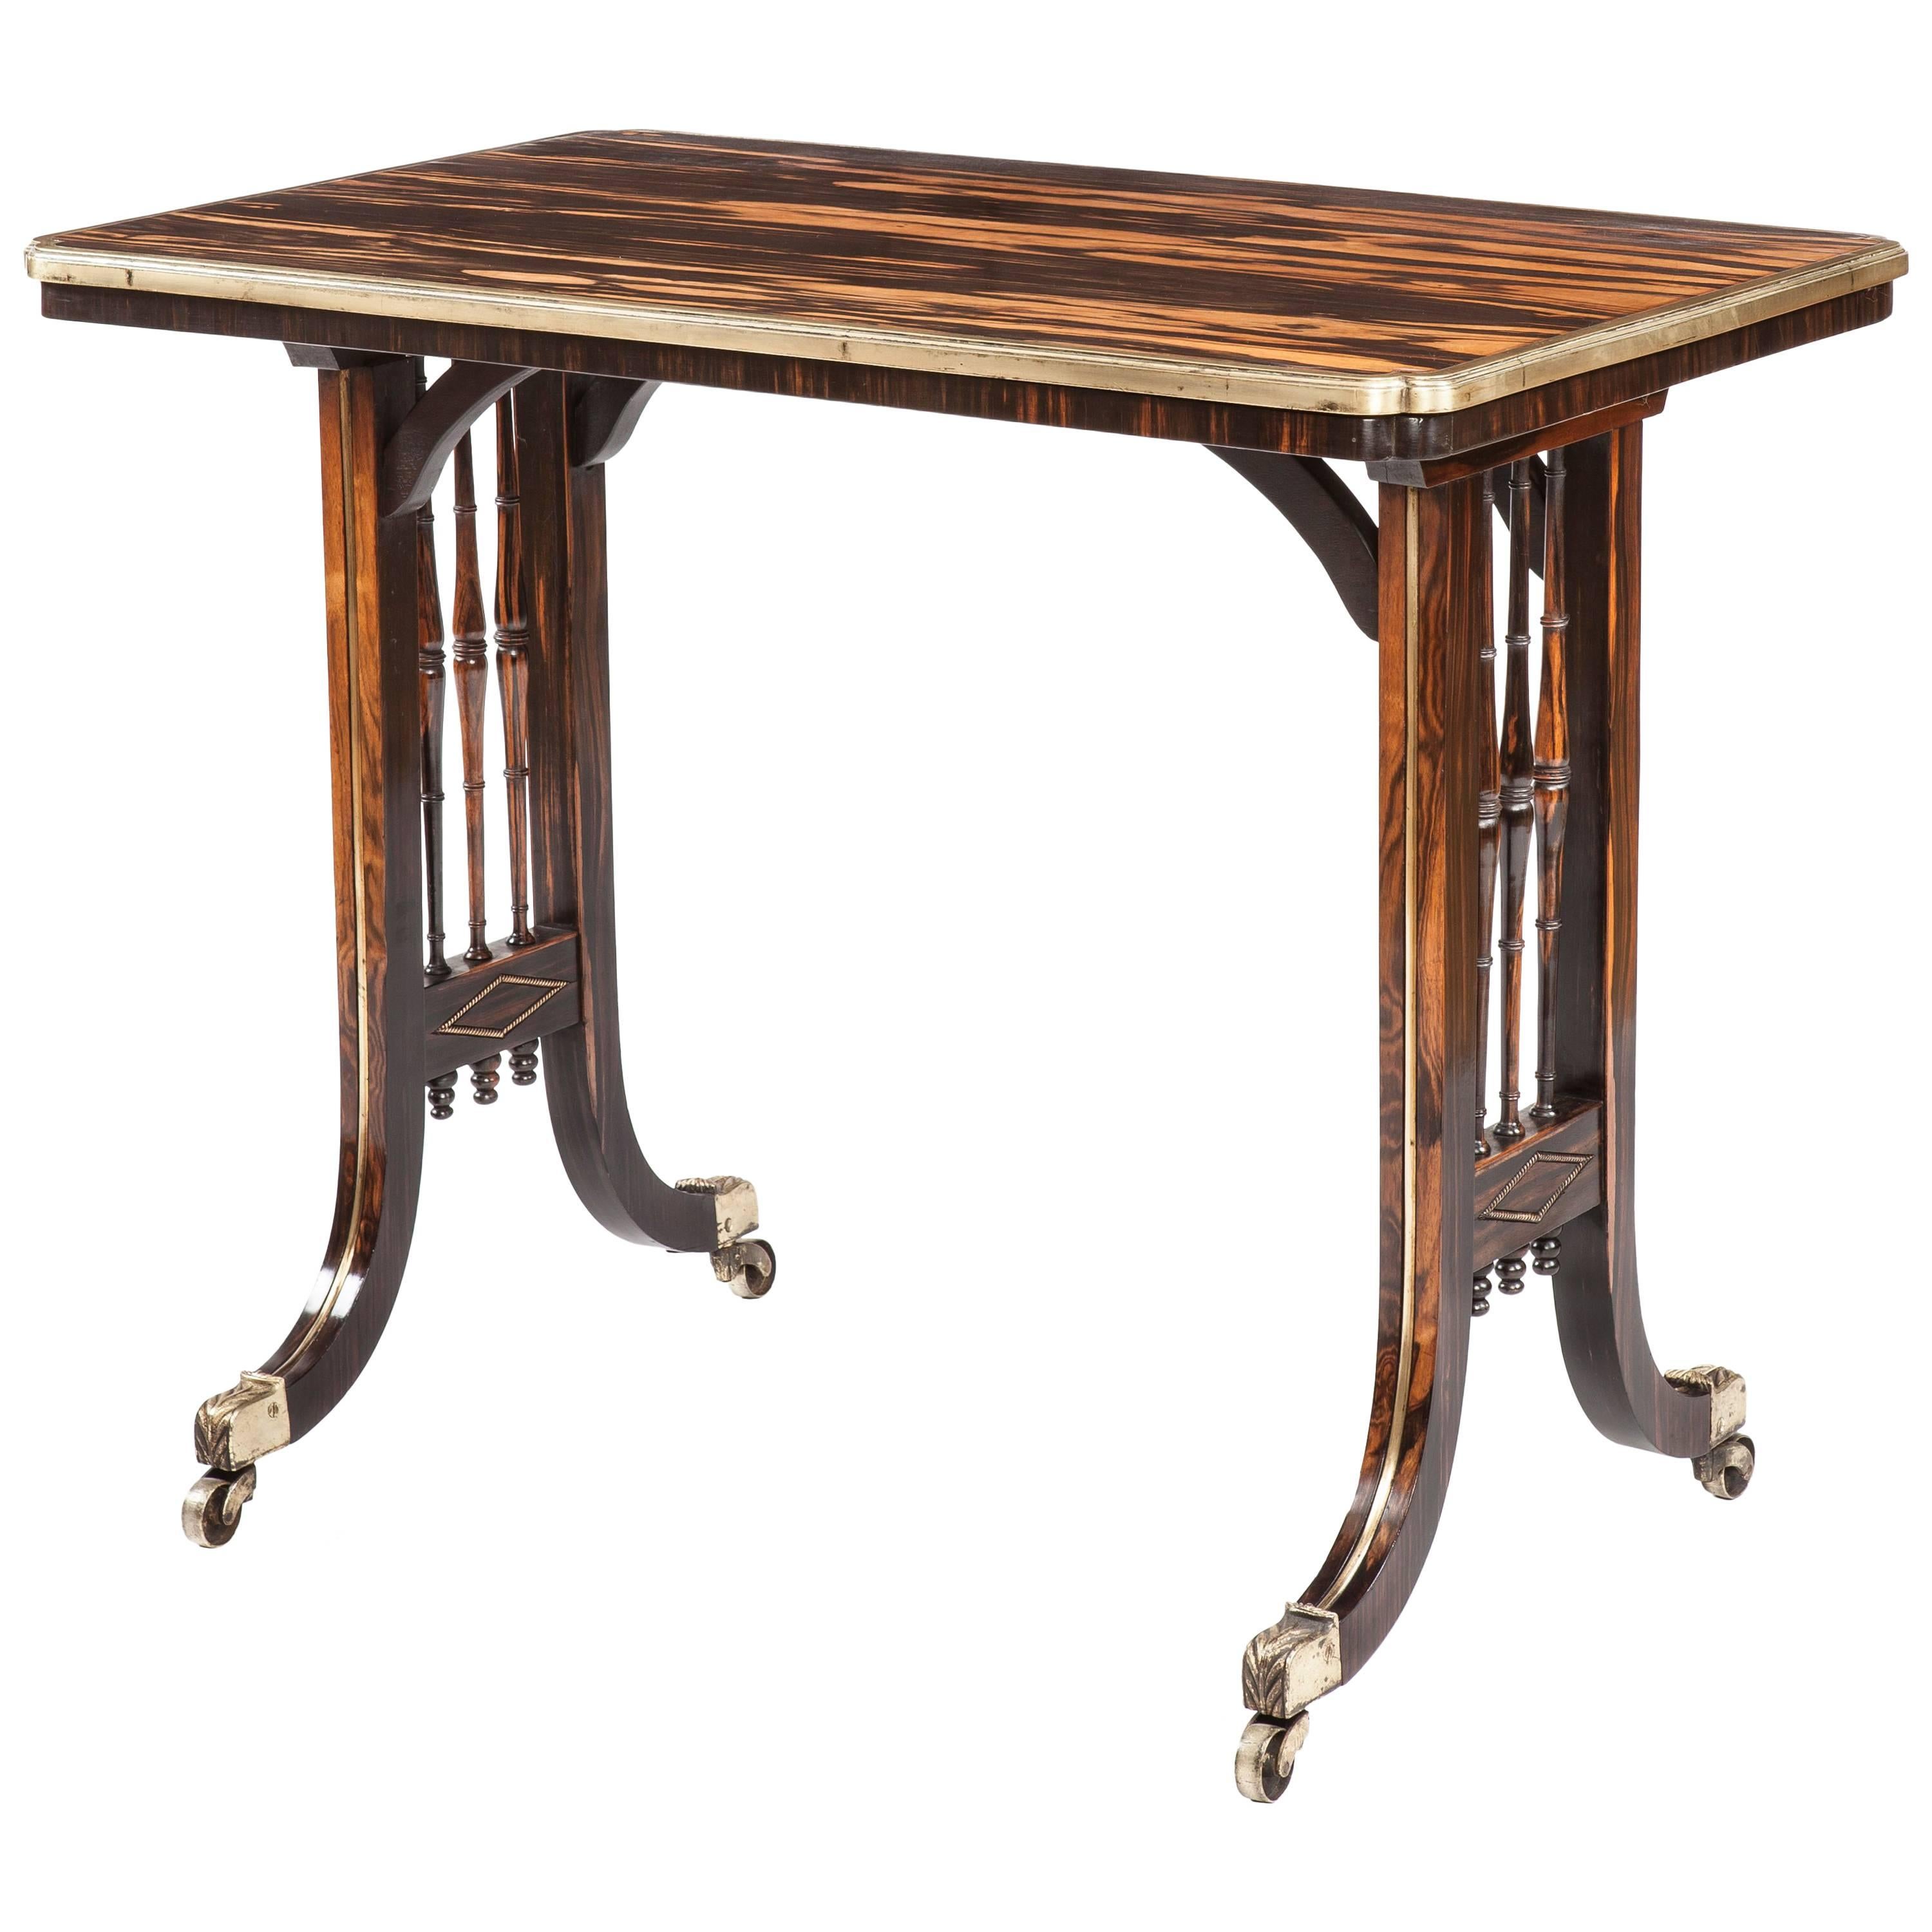 English Regency Period Coromandel and Brass Table Attributed to Gillow